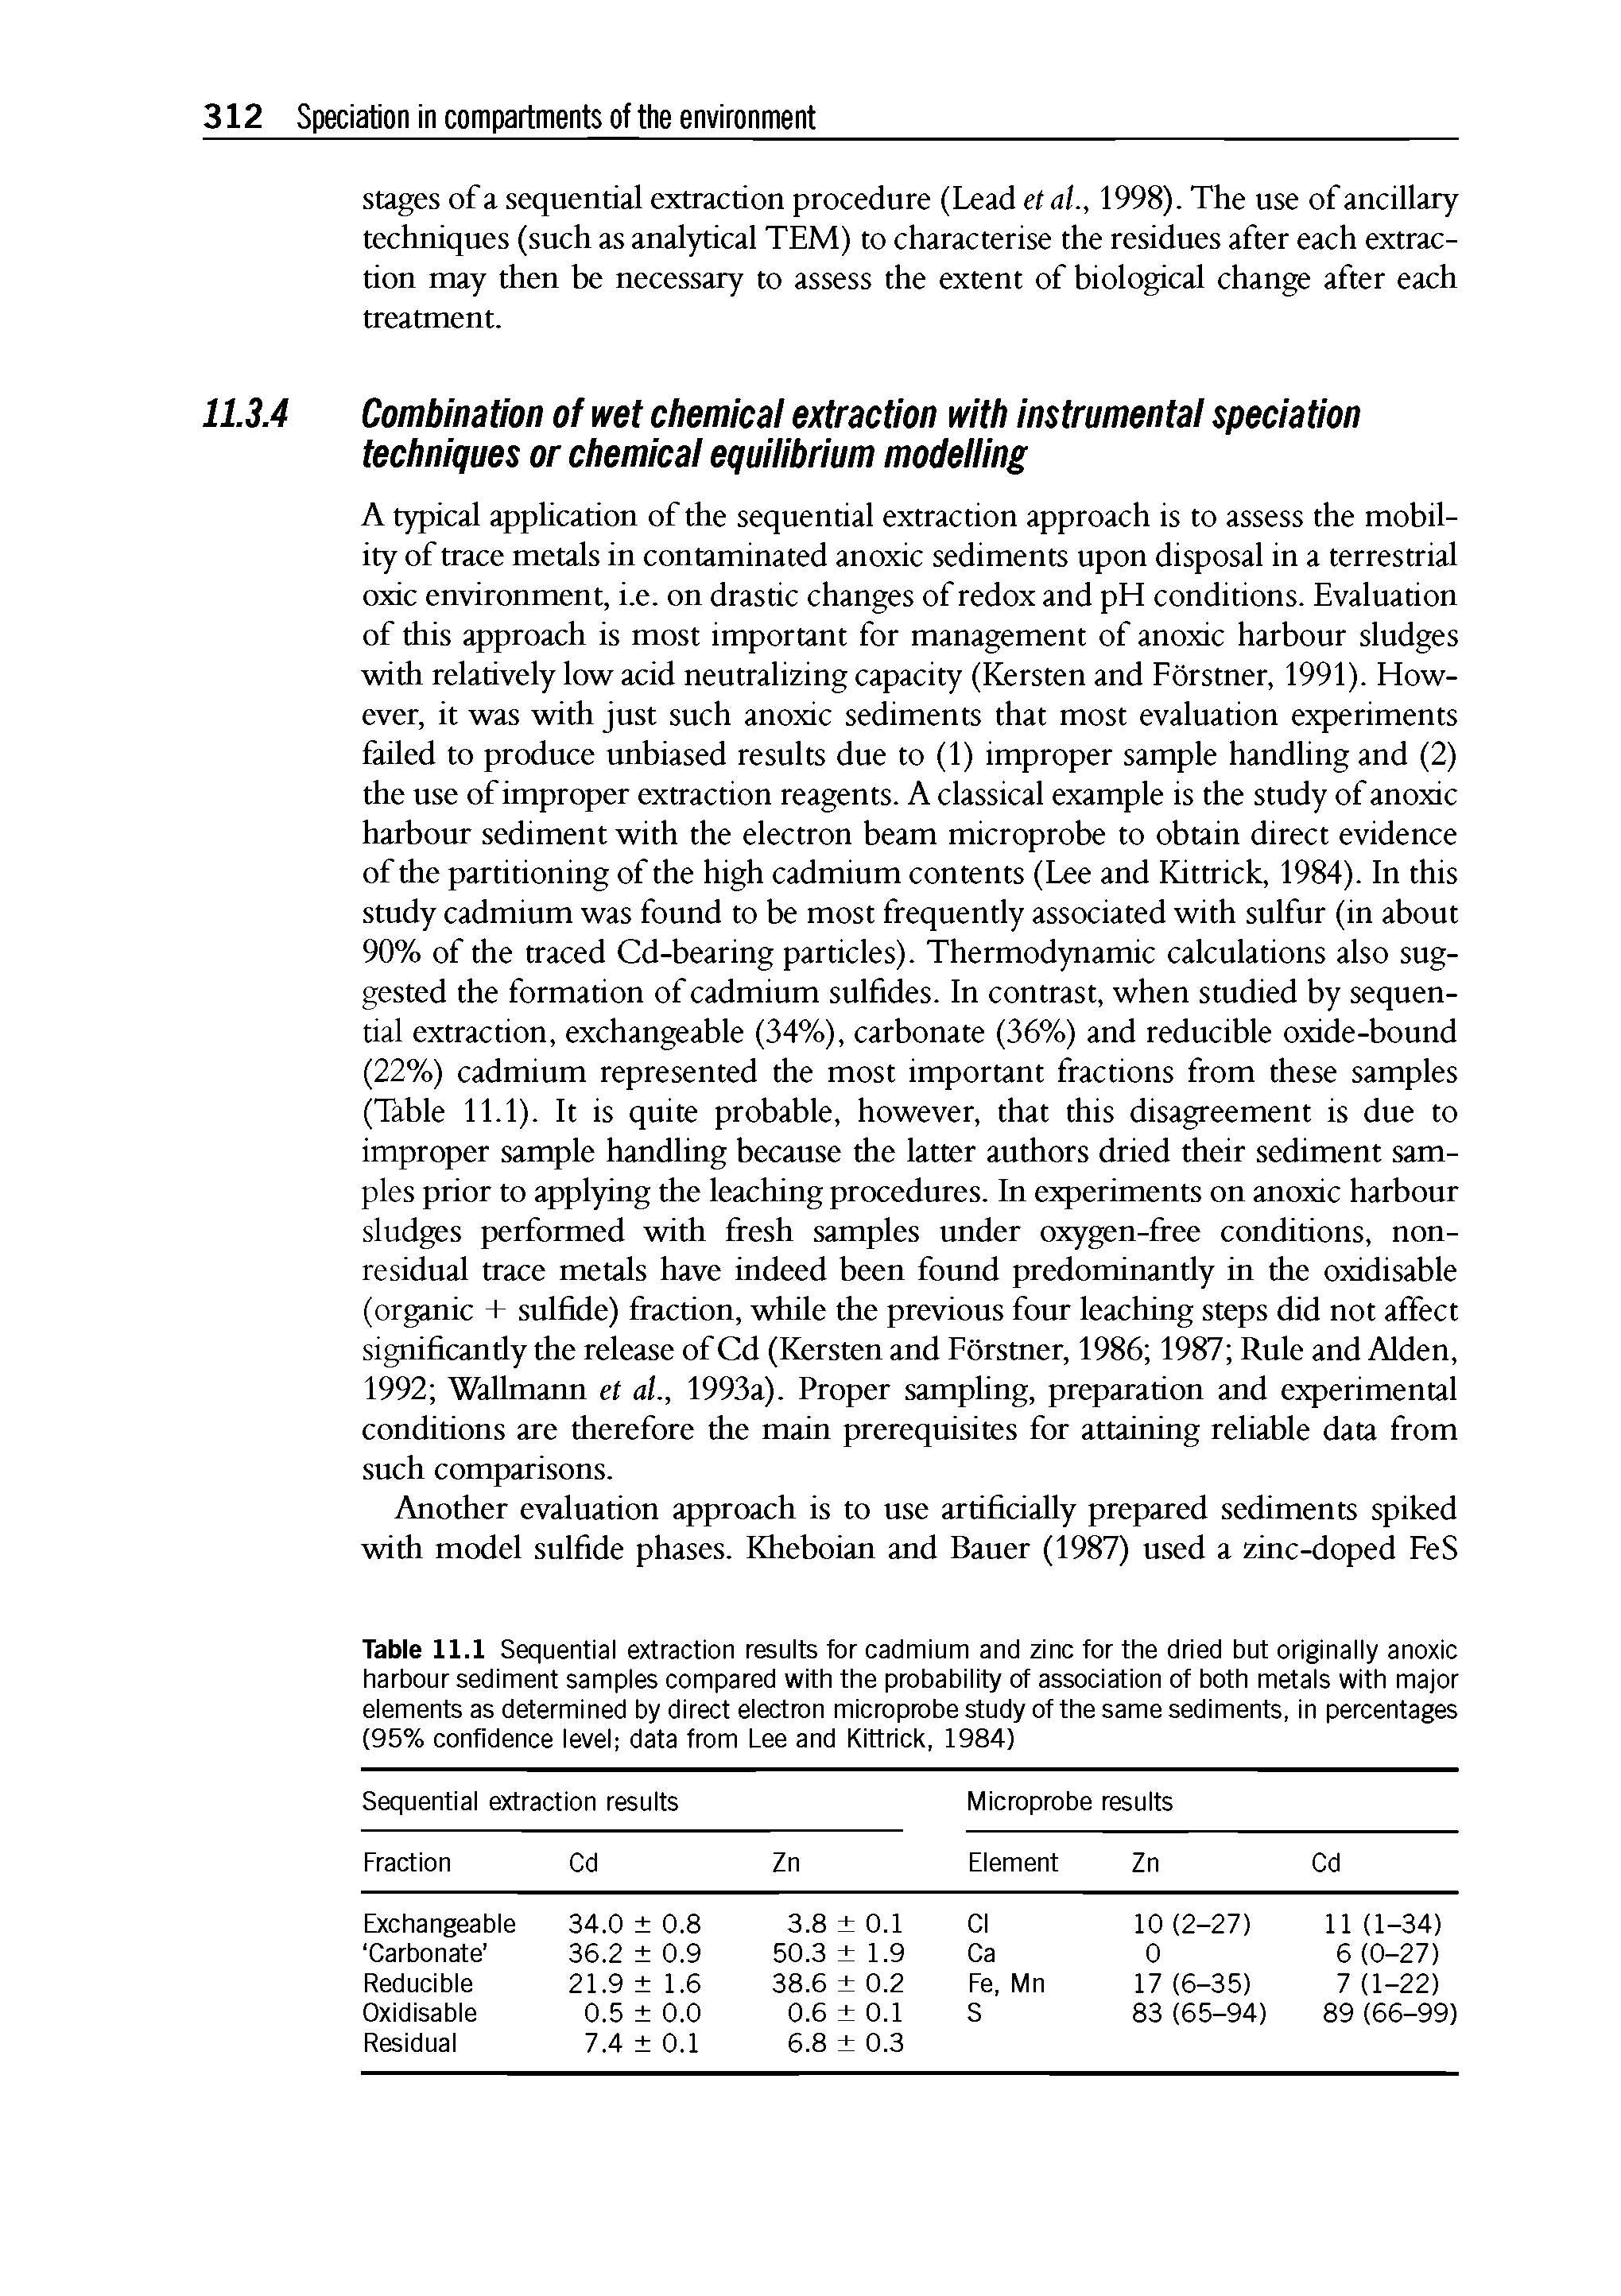 Table 11.1 Sequential extraction results for cadmium and zinc for the dried but originally anoxic harbour sediment samples compared with the probability of association of both metals with major elements as determined by direct electron microprobe study of the same sediments, in percentages (95% confidence level data from Lee and Kittrick, 1984)...